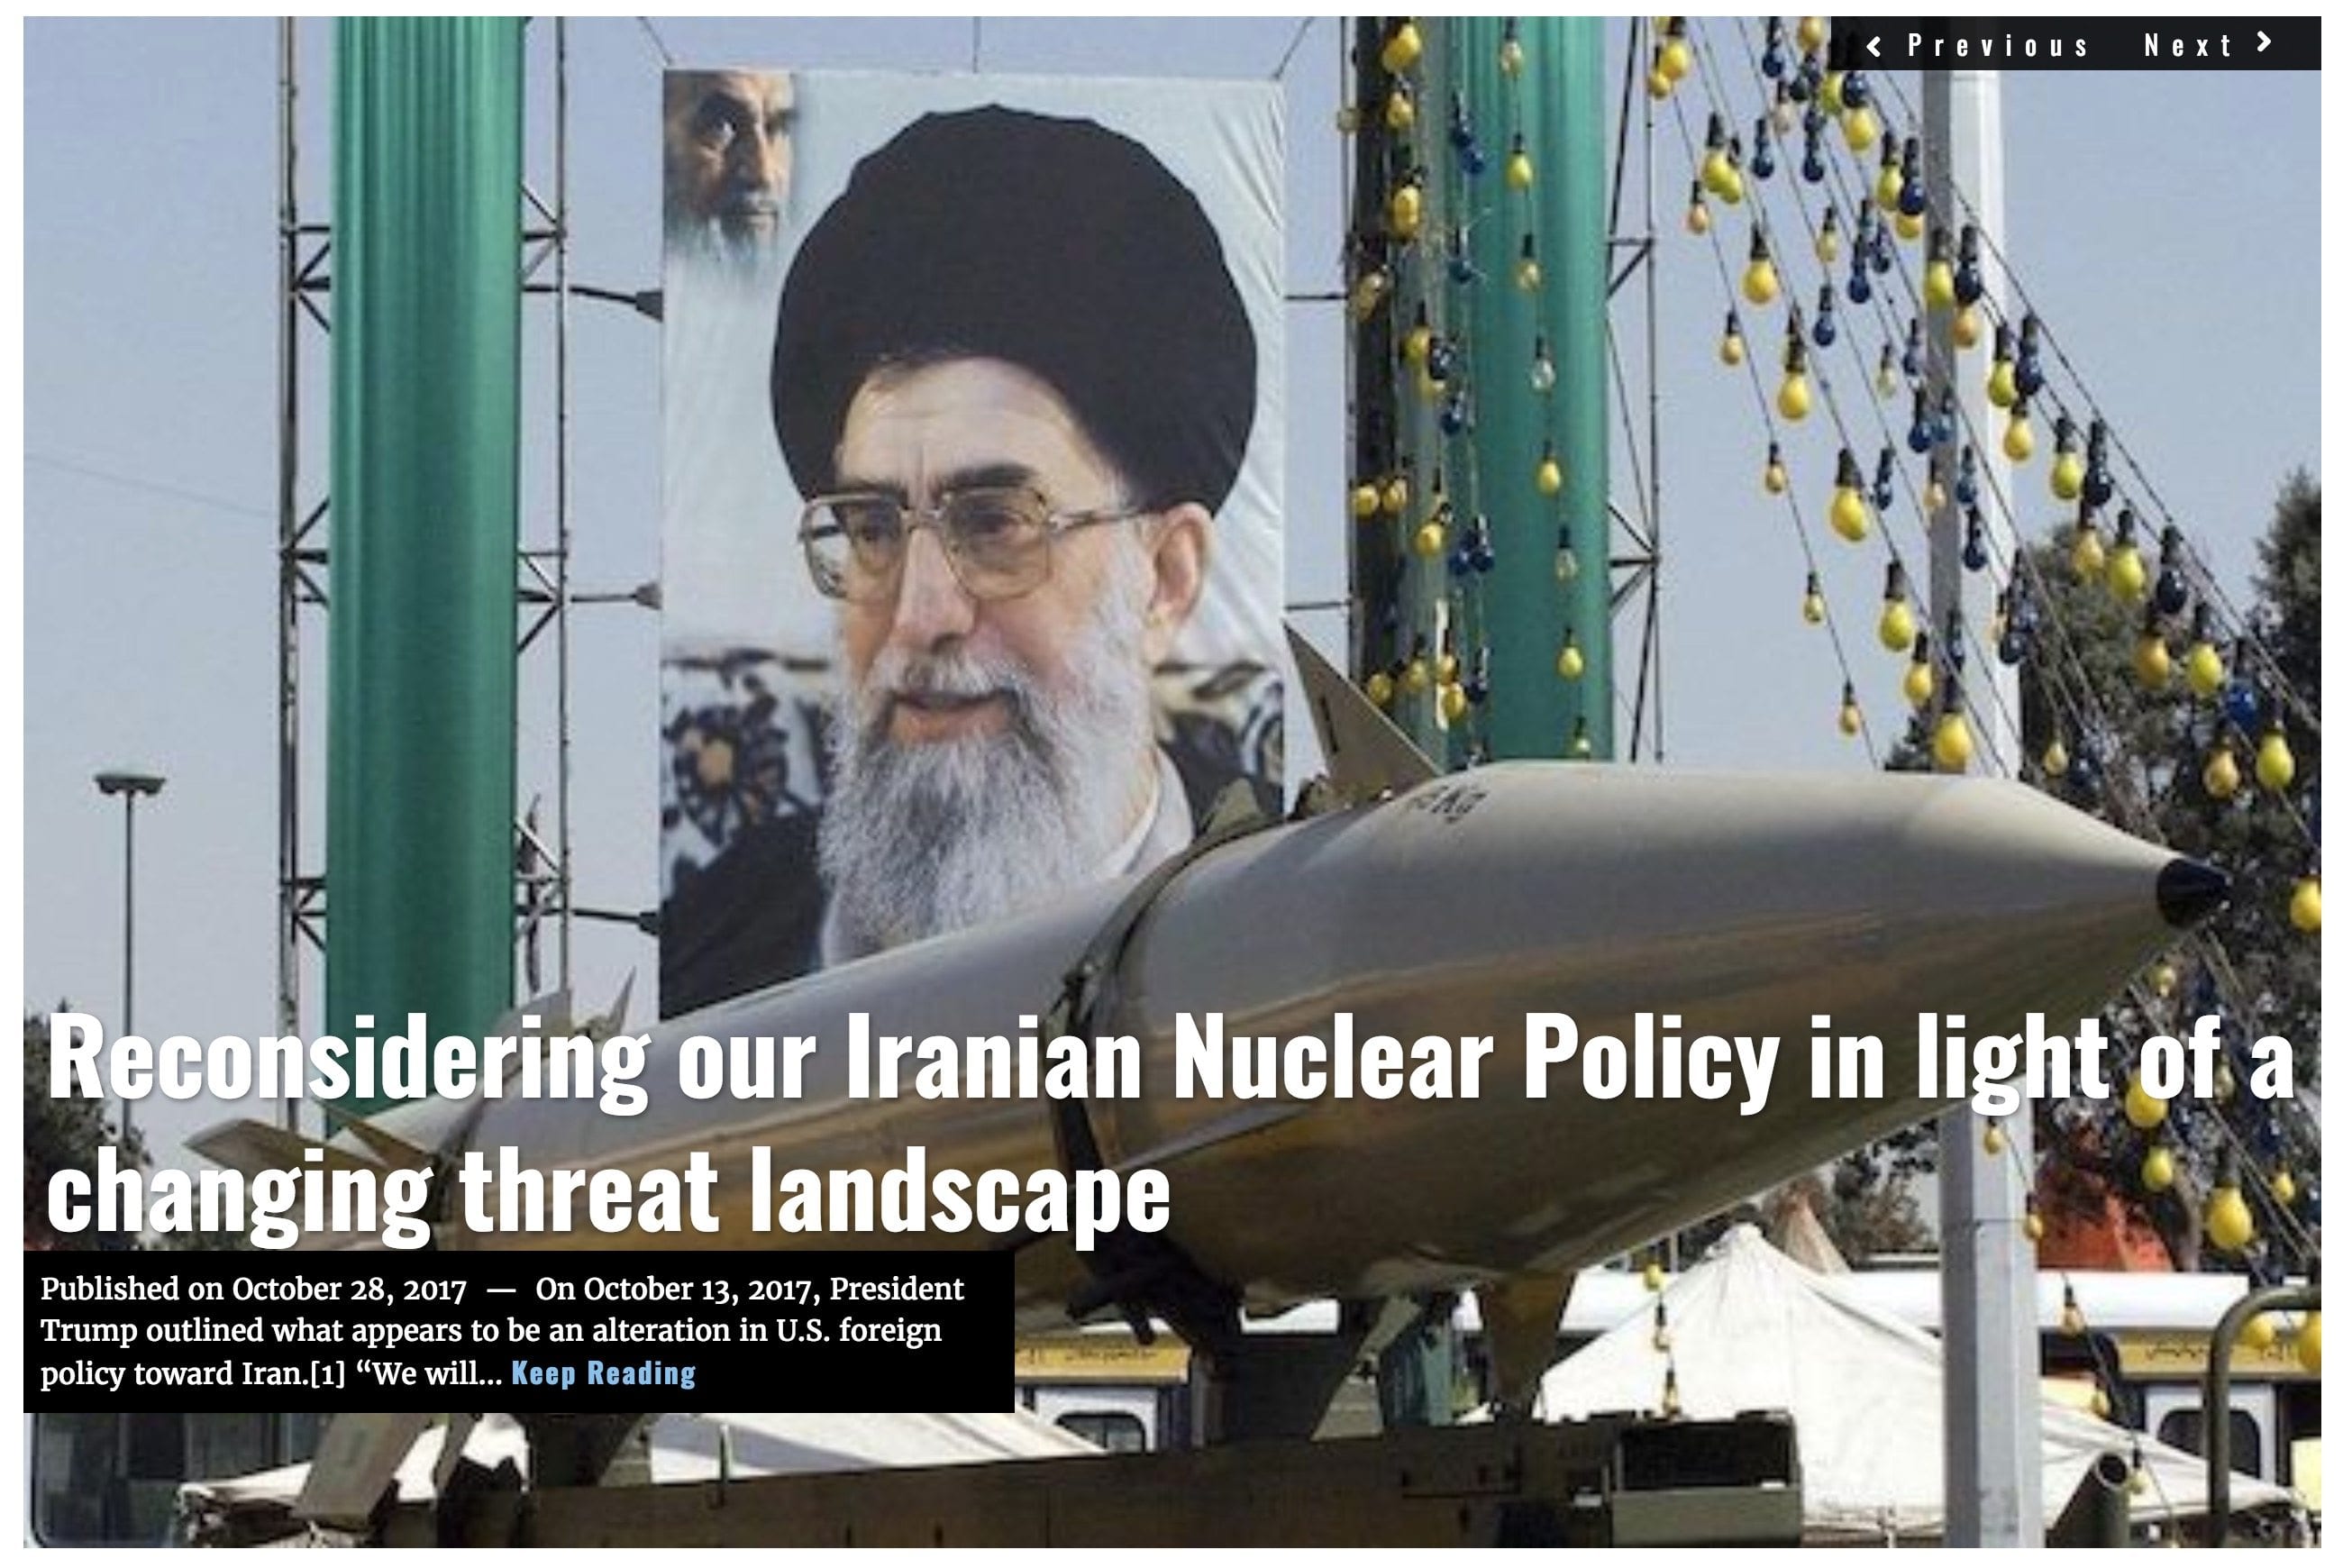 Image Lima Charlie News Headline Iran Nuclear Policy D.Firester OCT28